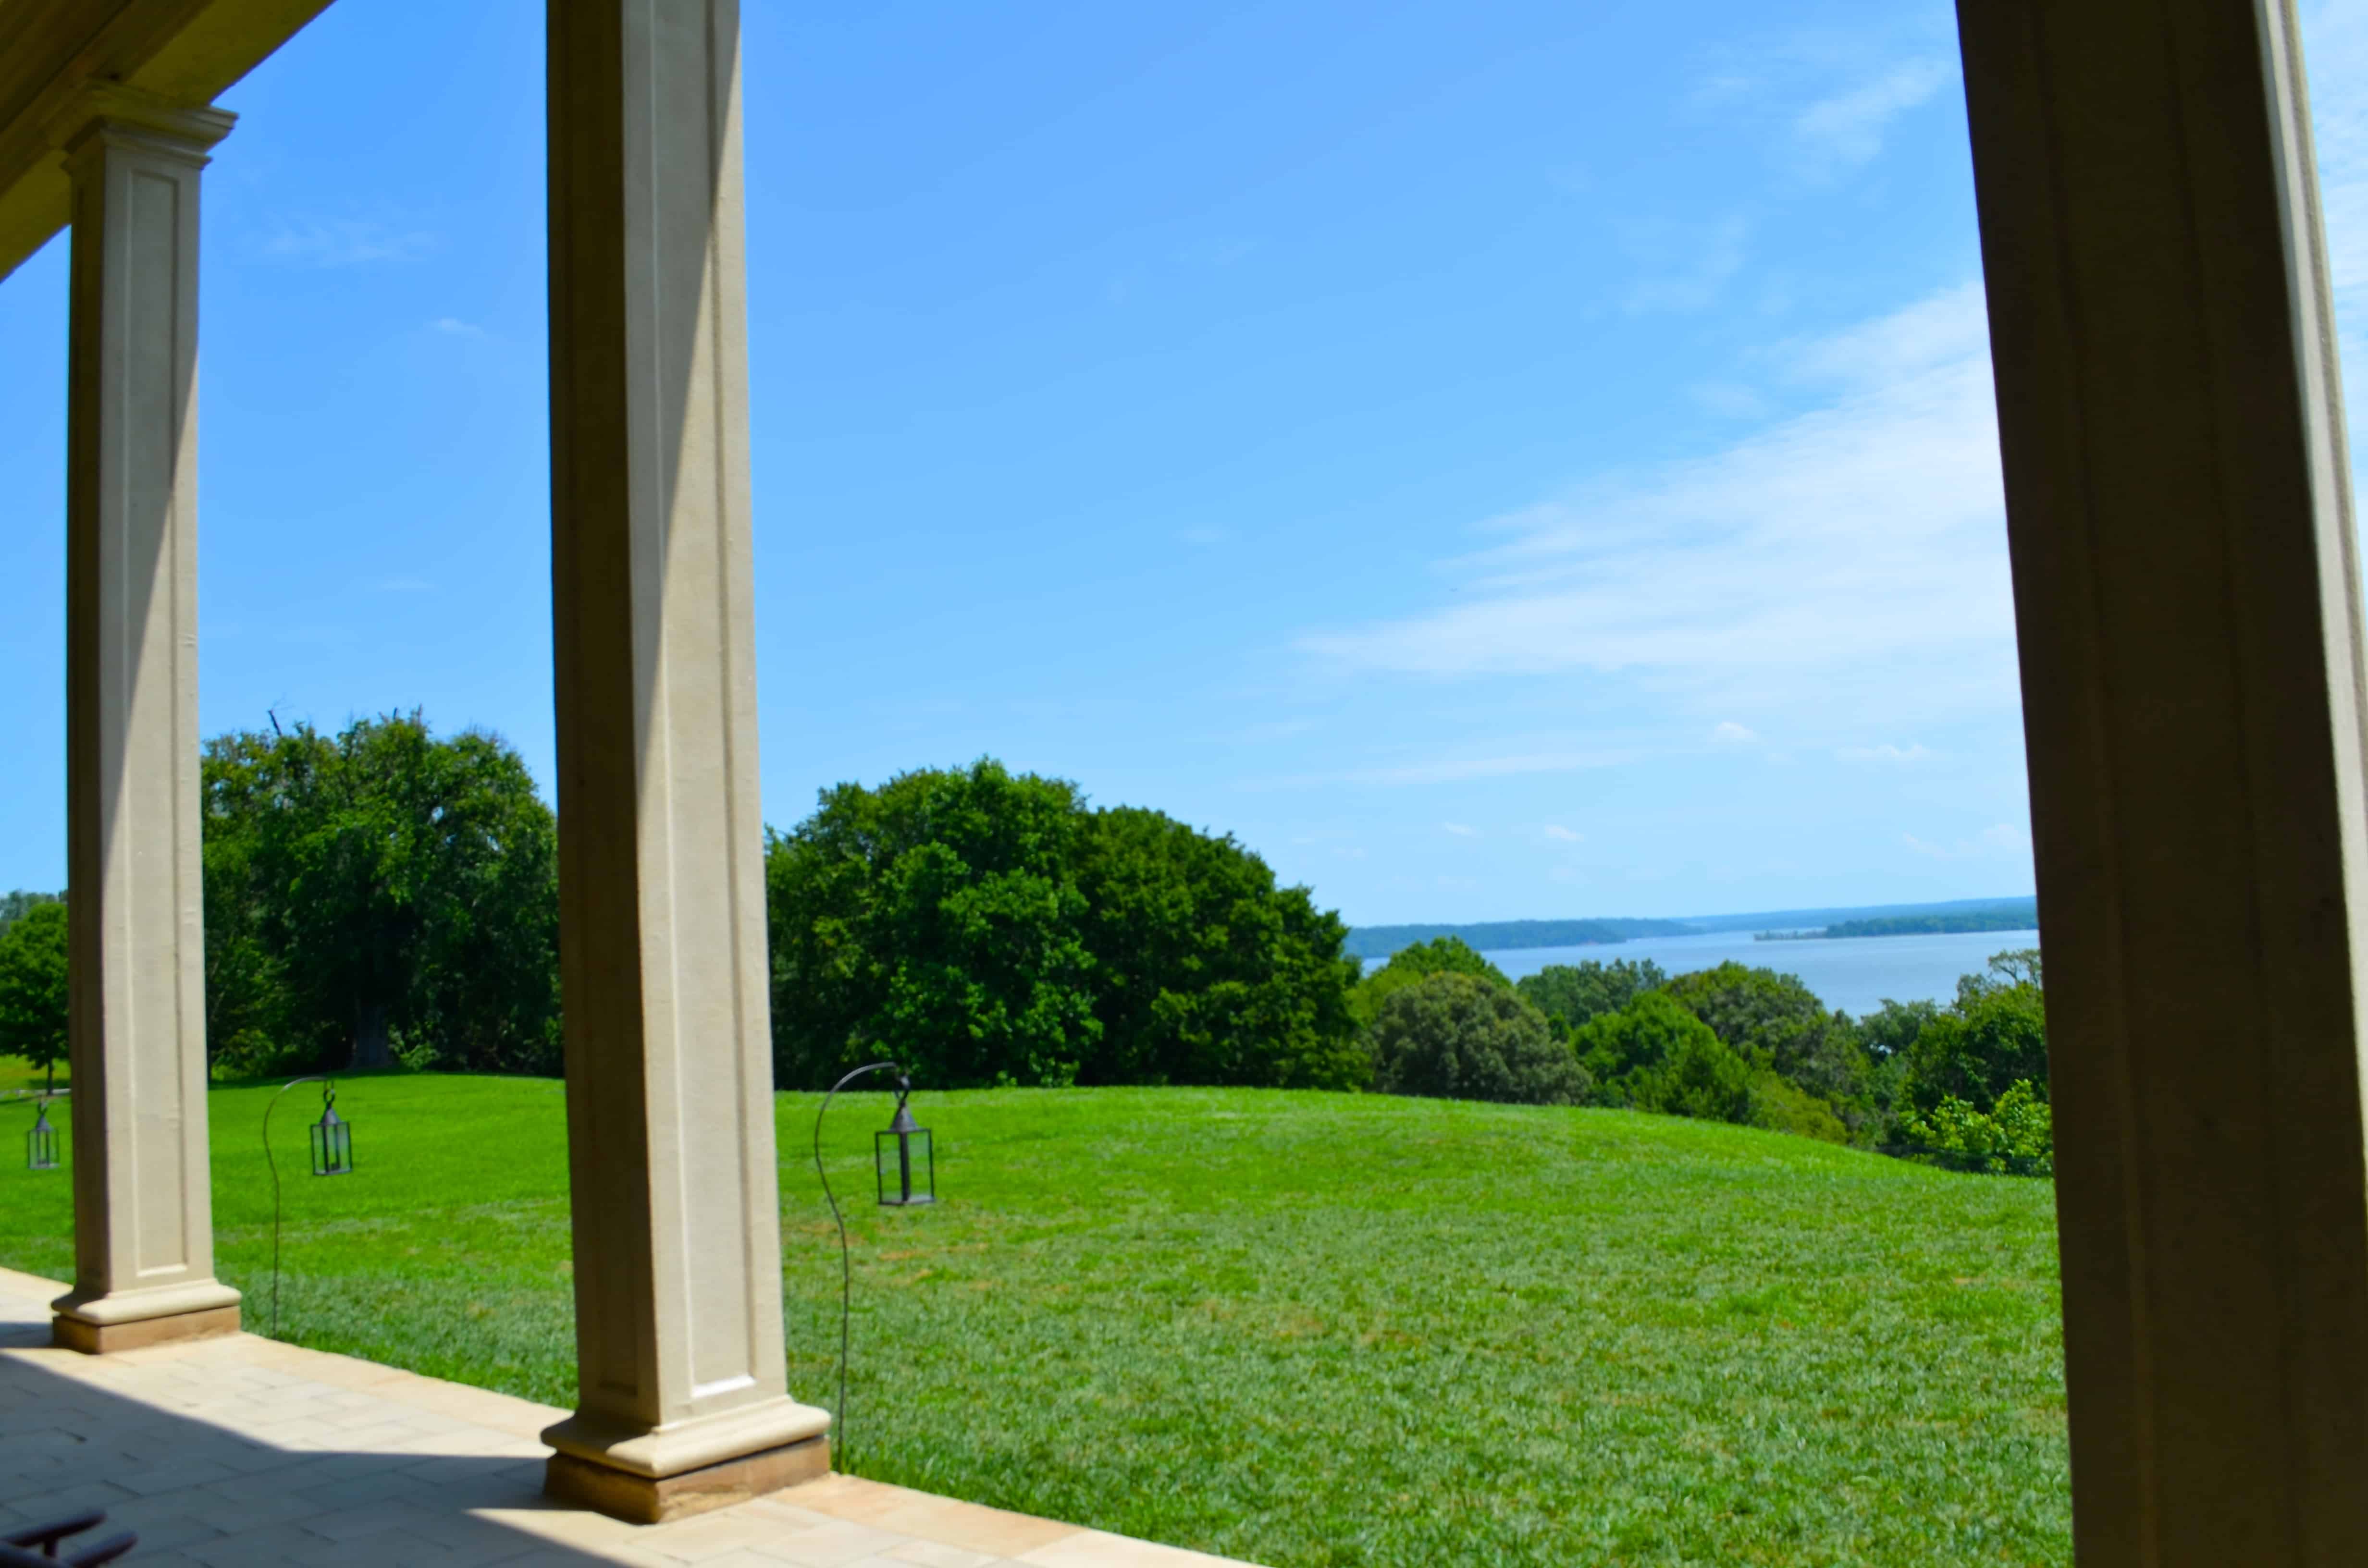 Visiting Mount Vernon and the National Treasure Walking Tour